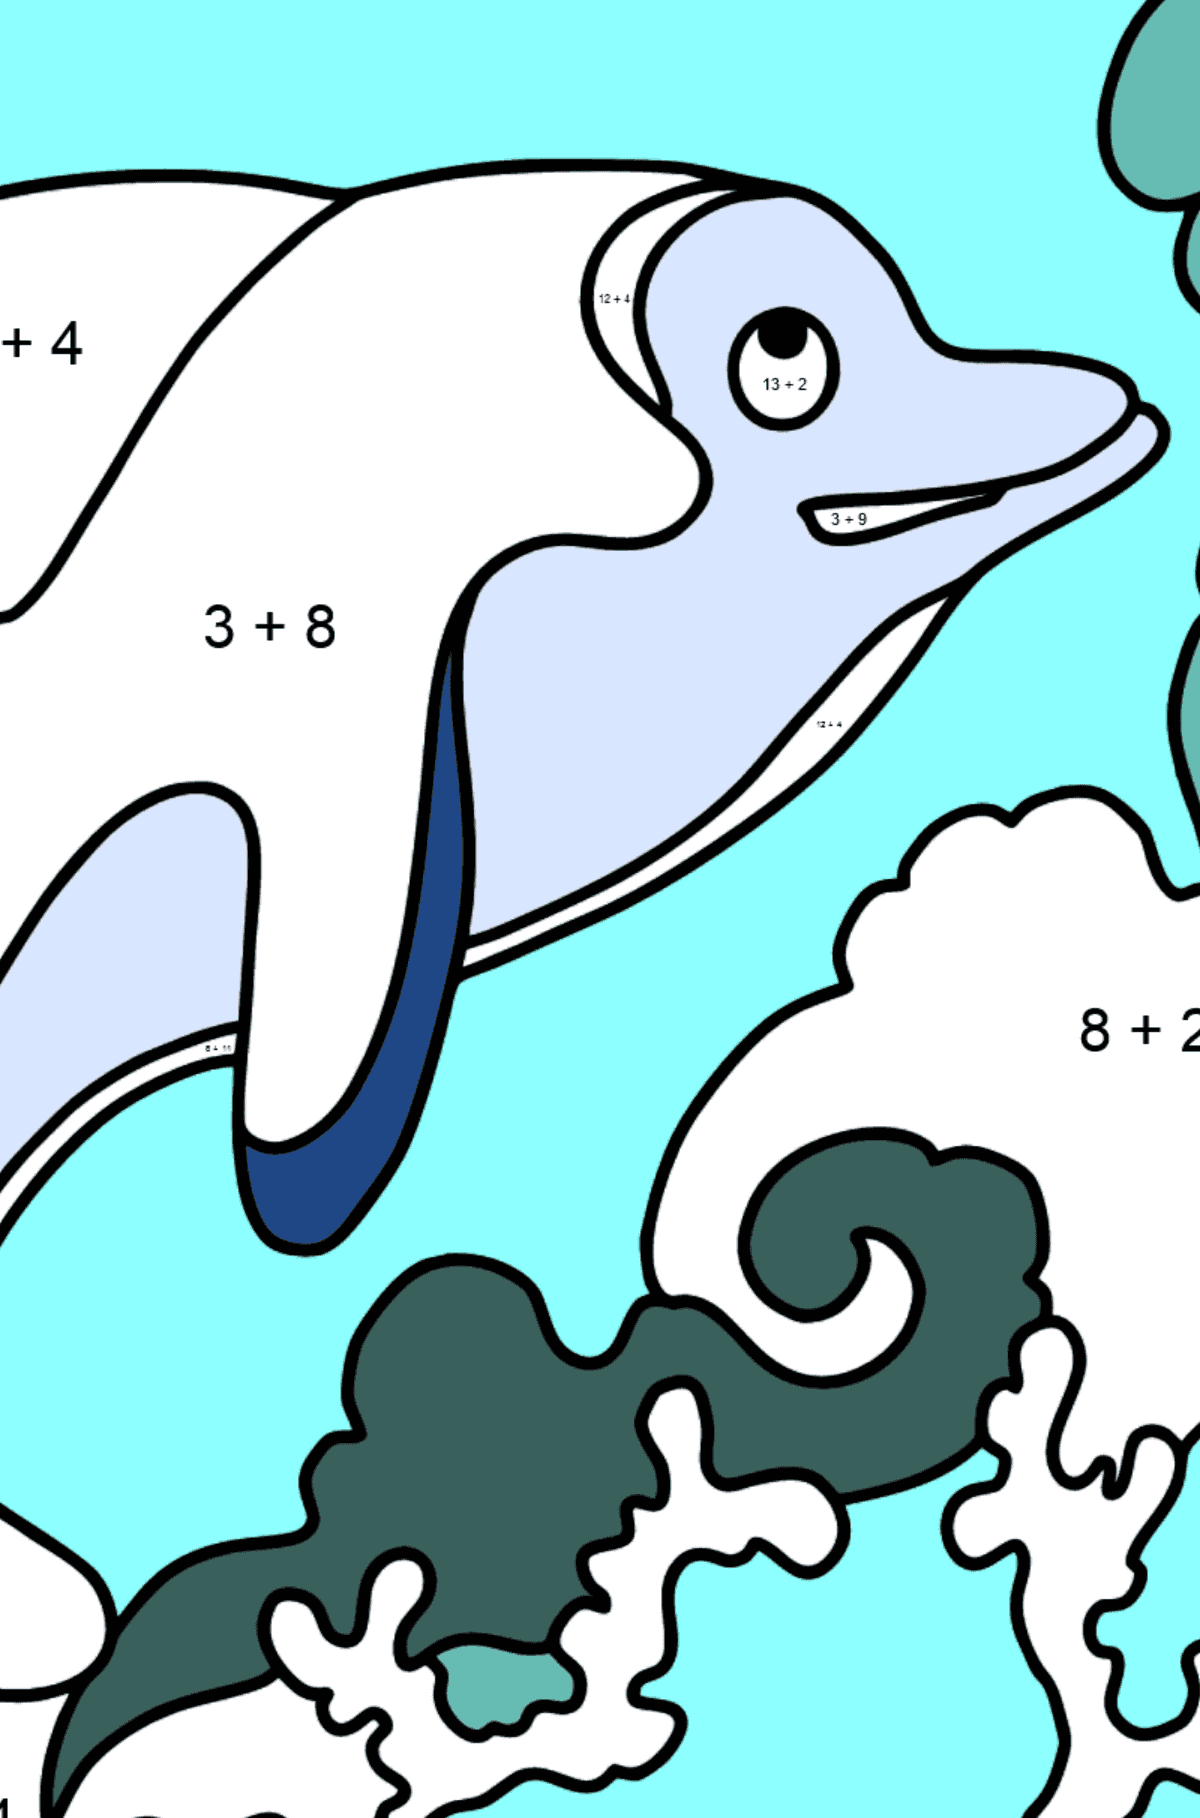 Coloring Page - A Dolphin, an Inquisitive Animal - Math Coloring - Addition for Kids